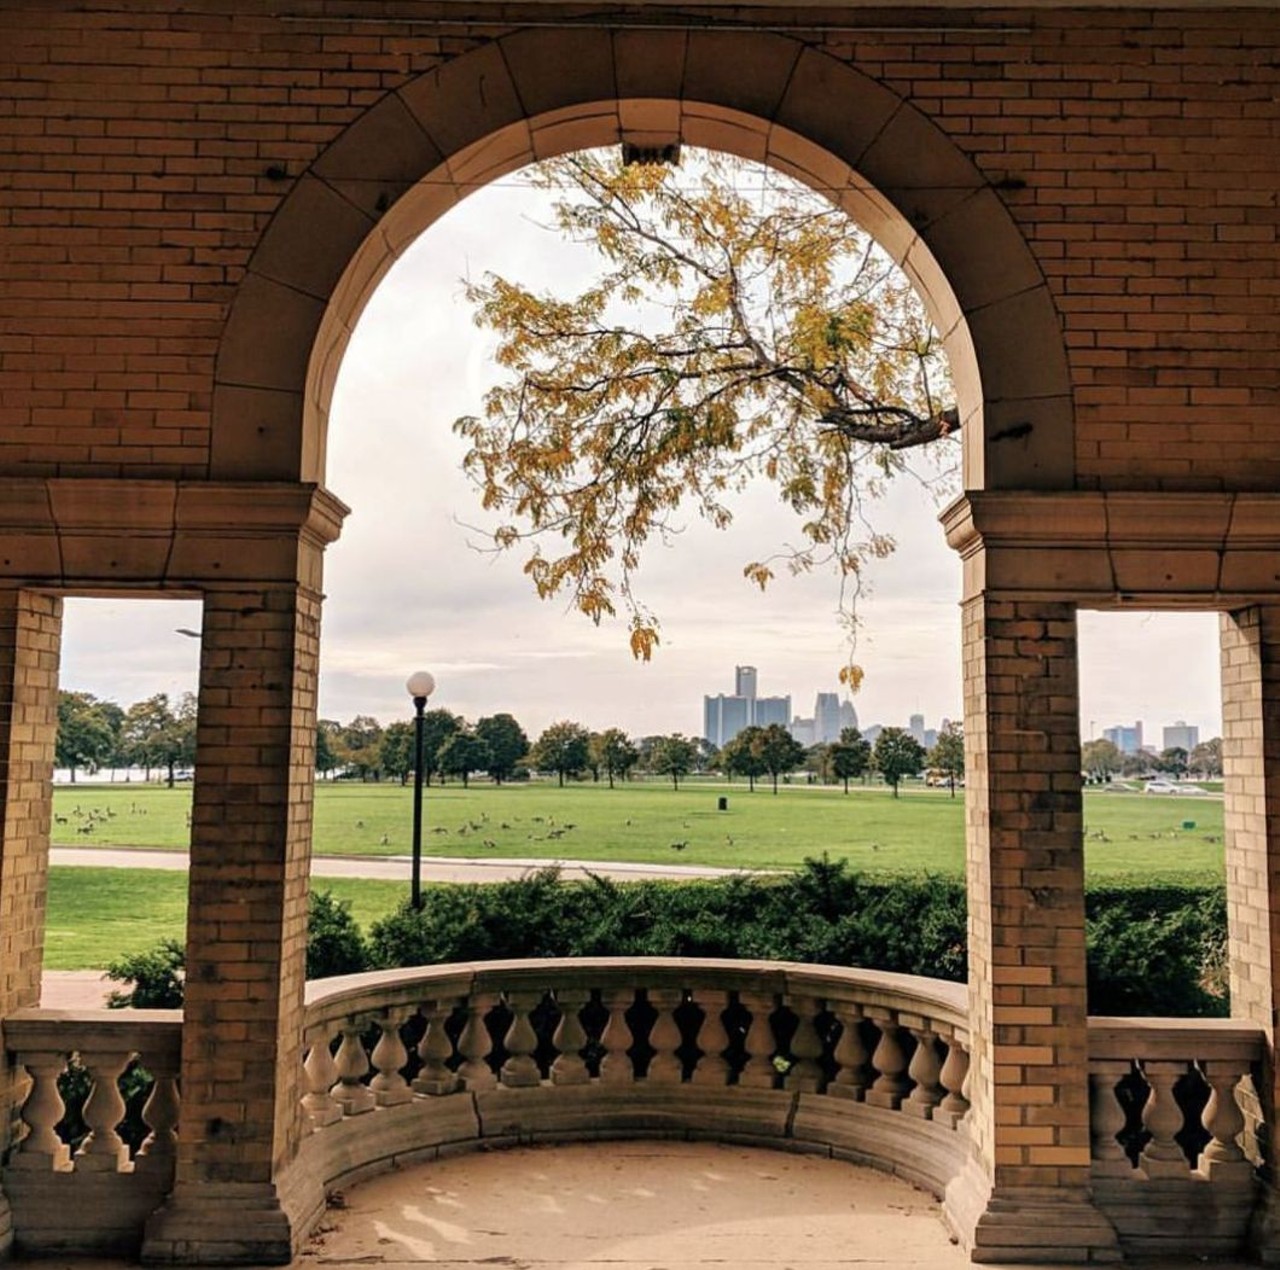 Belle Isle
East Jefferson Ave, Detroit, MI 48207
The 982-acre island park is Detroit&#146;s greatest recreational gem. With hiking trails, swimming beaches, and an aquarium, Belle Isle is worth exploring year-round. 
Photo courtesy of @belleislestat